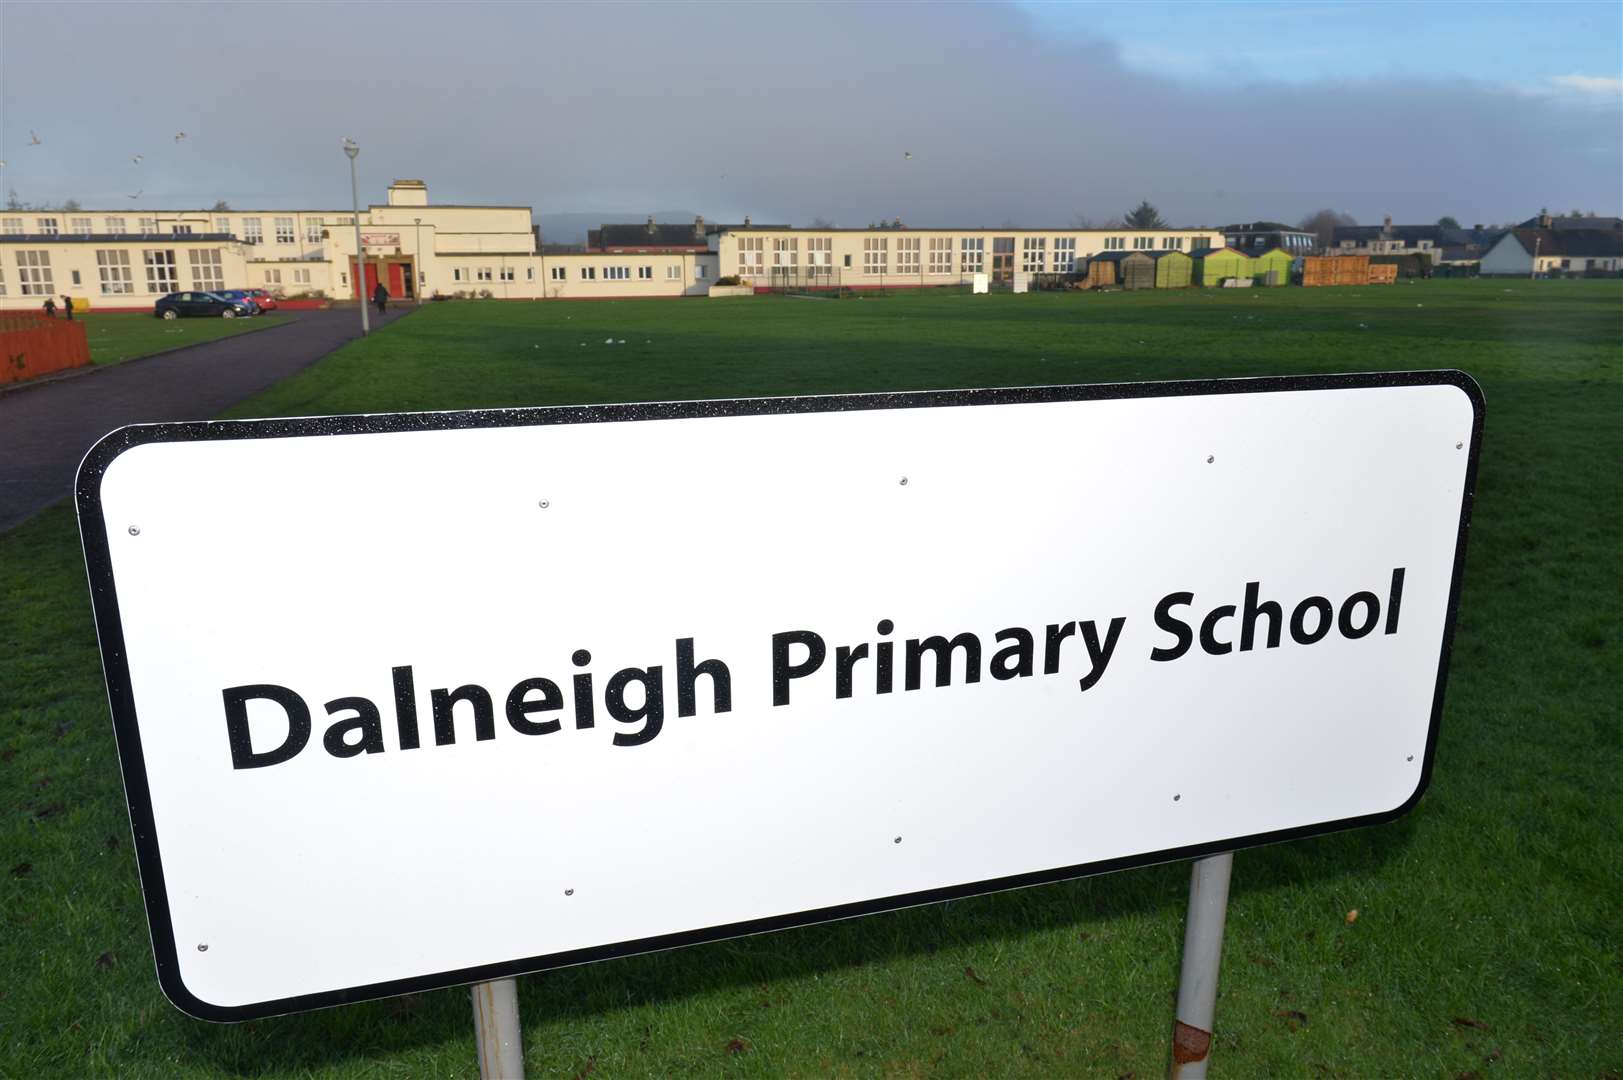 Dalneigh Primary School.